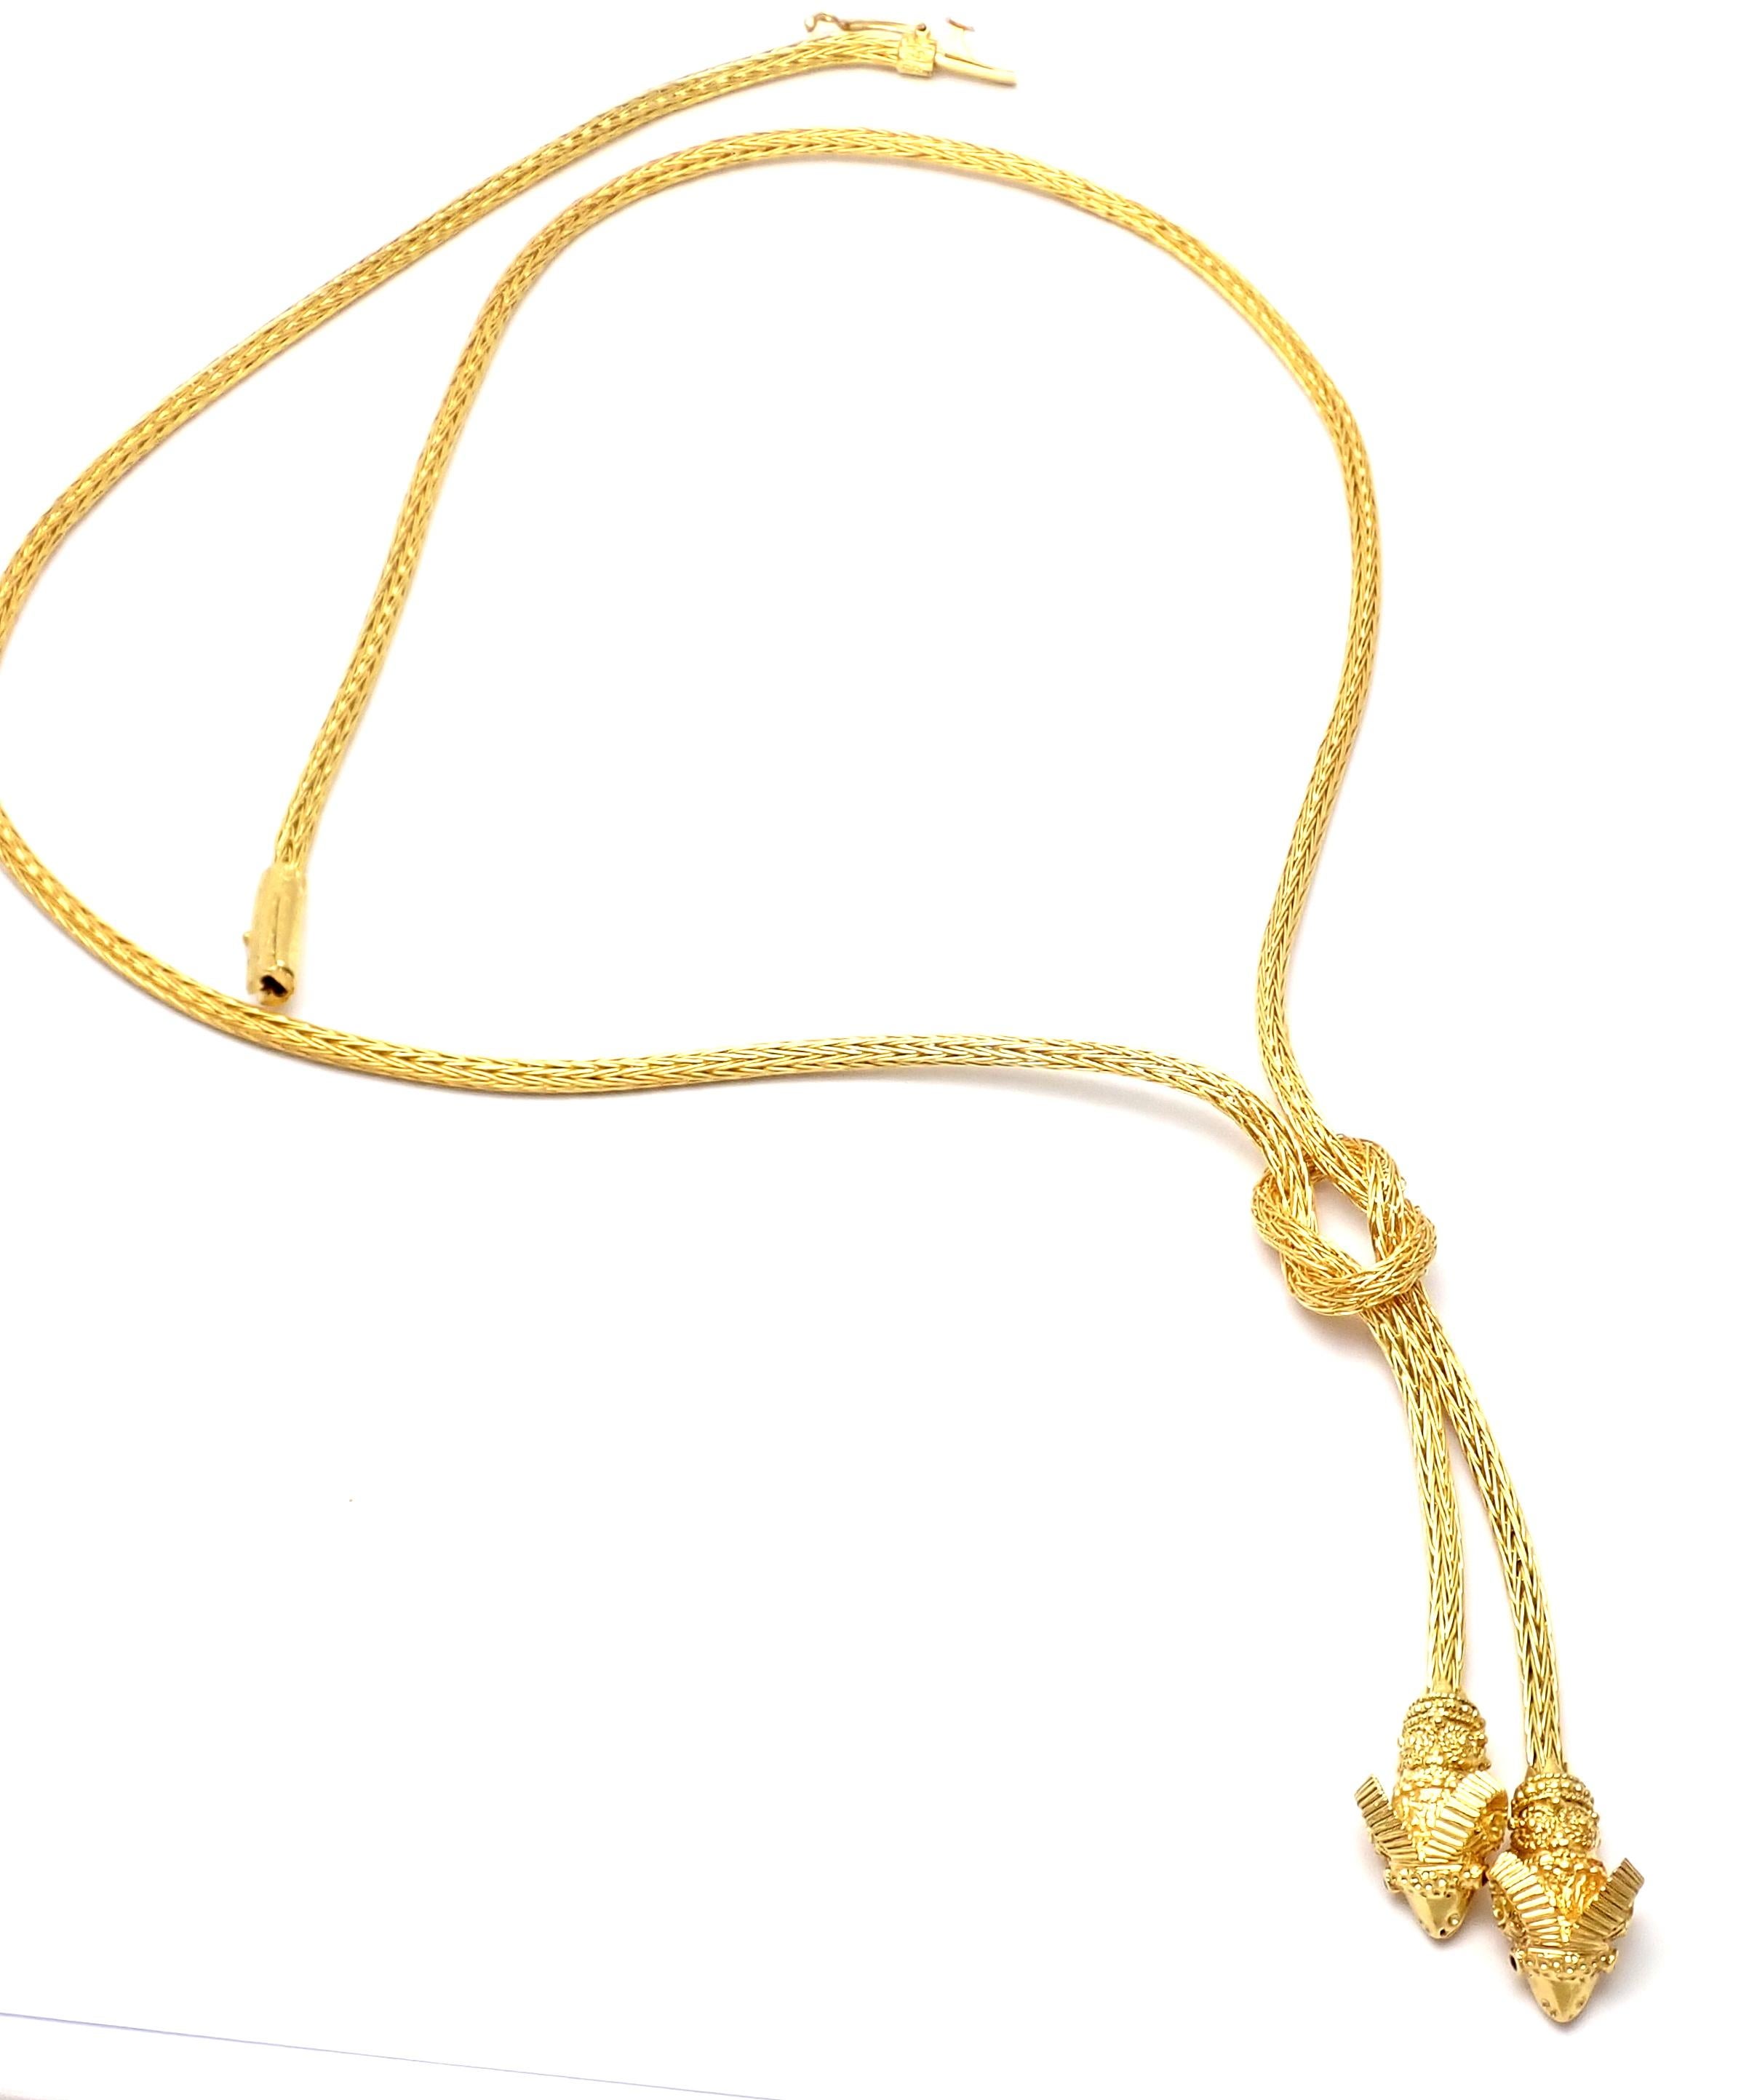 Ilias Lalaounis Ruby Hercules Knot Ram Head Yellow Gold Necklace 2